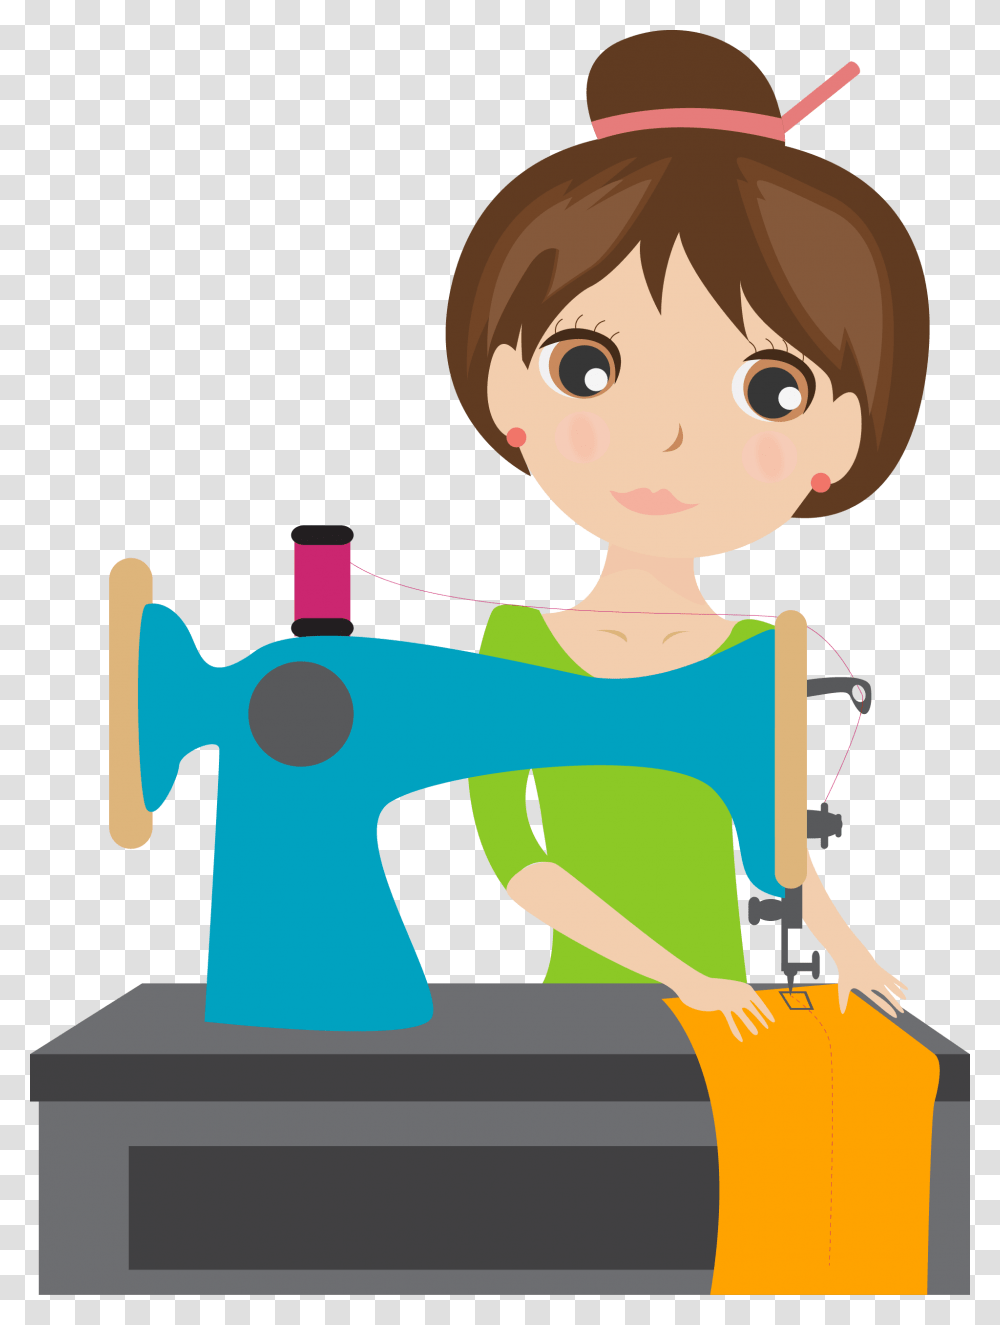 Sew Me Up Sewing Sewing, Machine, Toy, Appliance, Sewing Machine Transparent Png